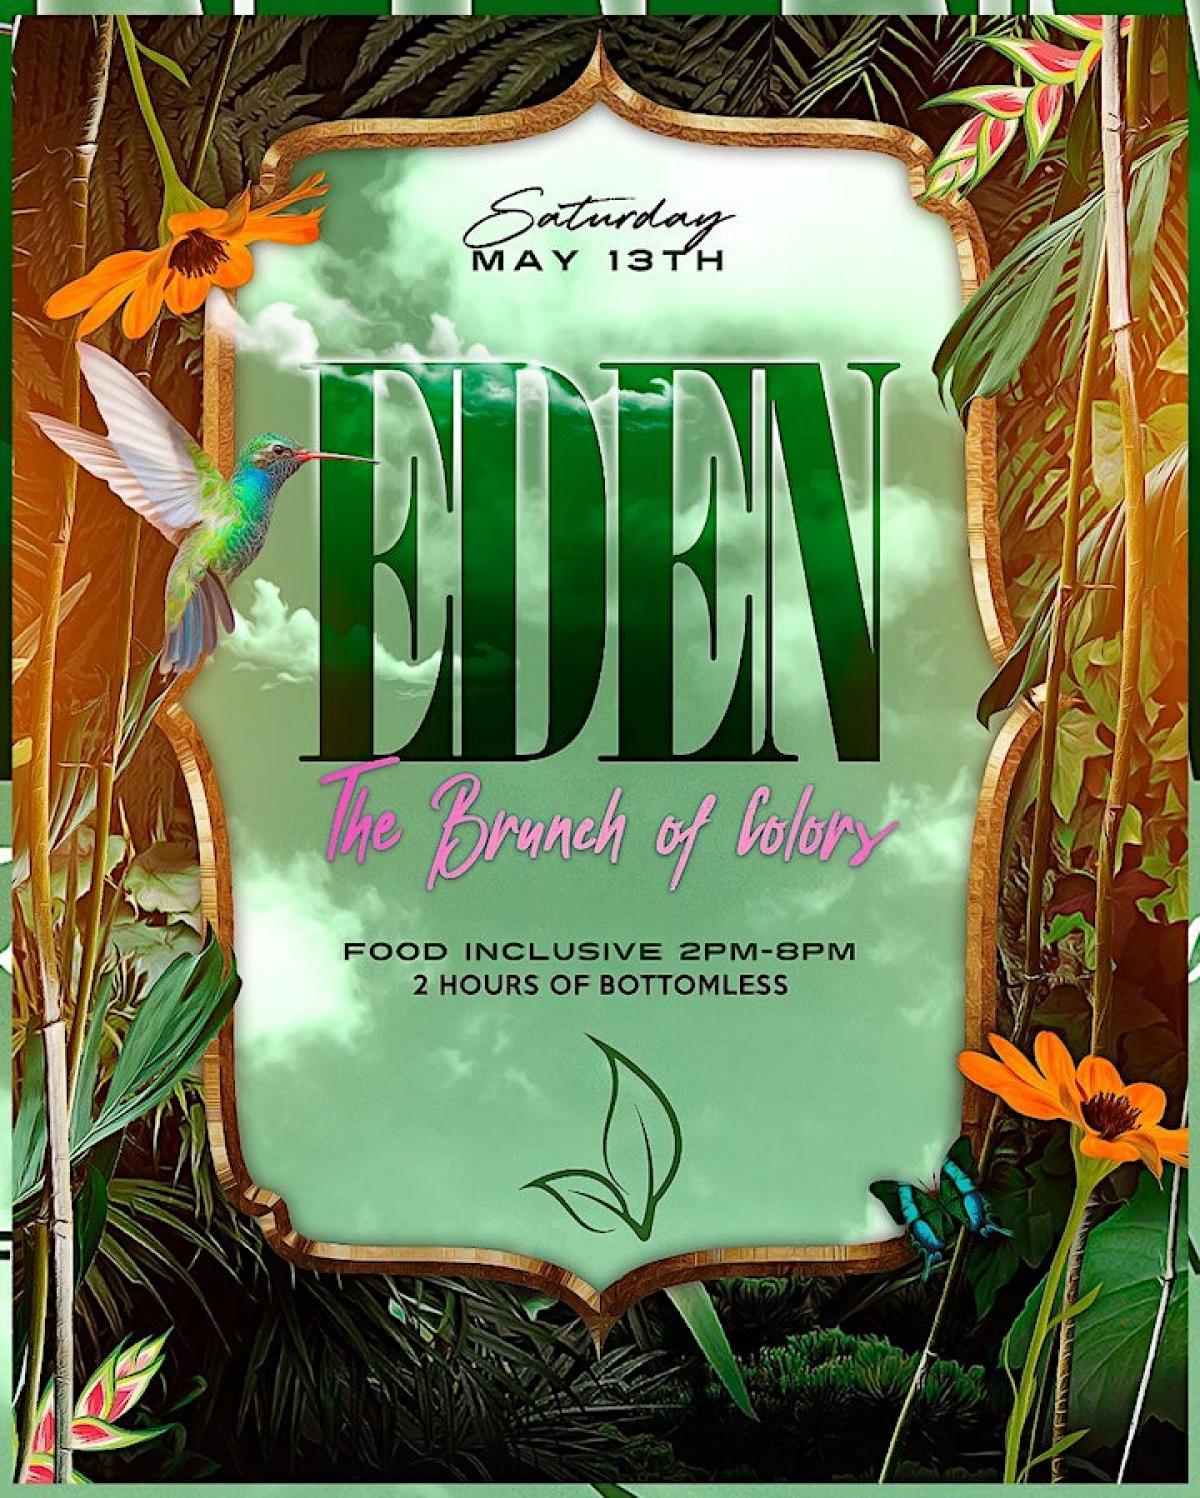 Eden: The Brunch Of Colors flyer or graphic.